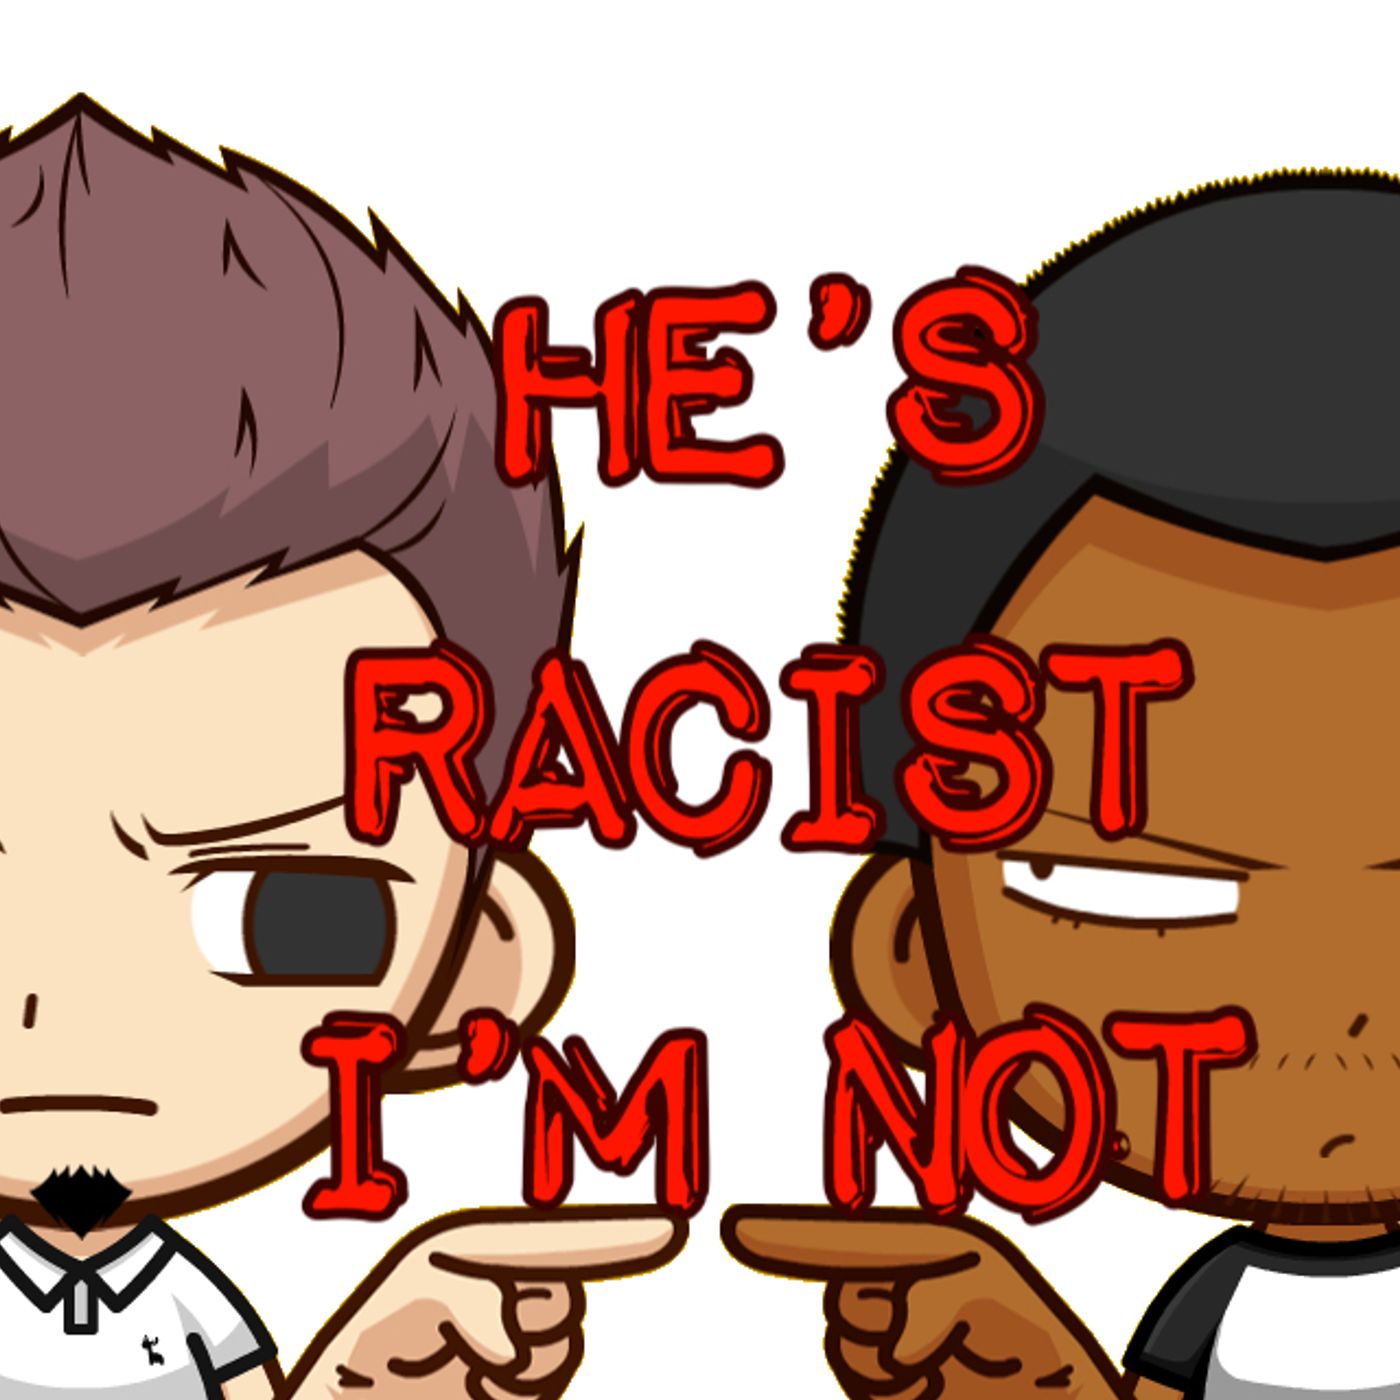 He’s Racist…I’m Not!